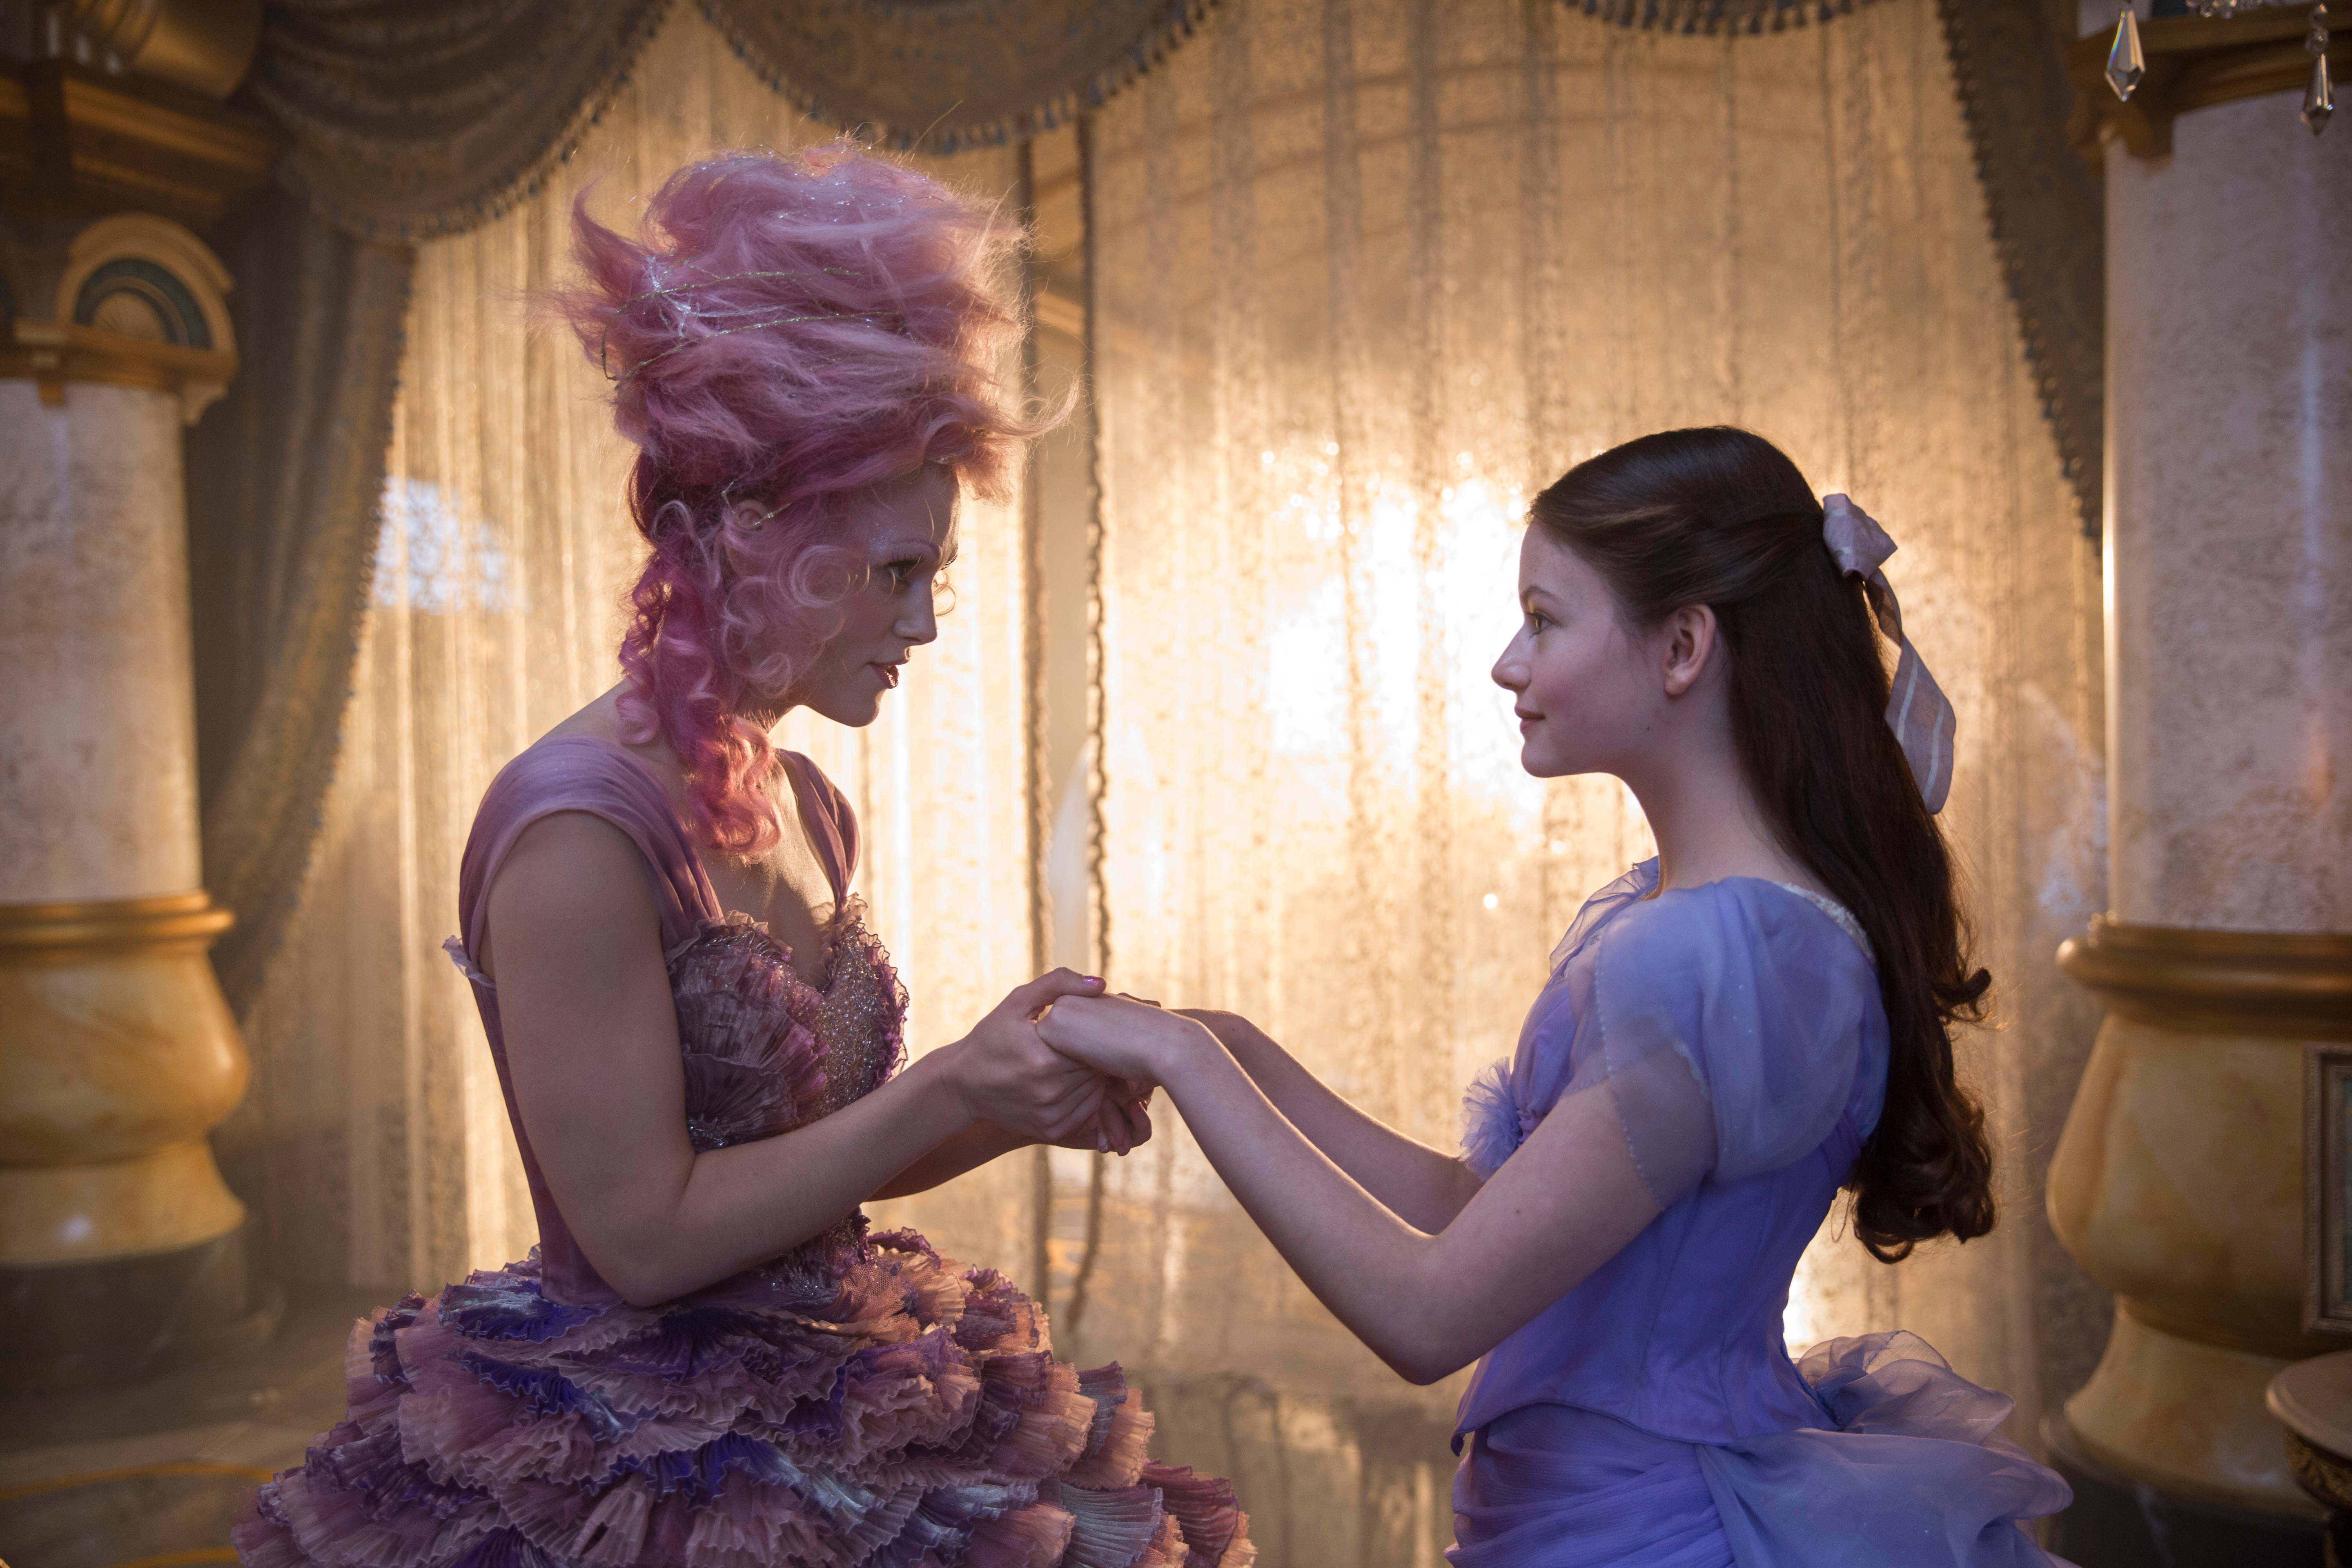 Take the Magic of Disney’s “The Nutcracker and the Four Realms” When it Hits Home Theaters on January 29